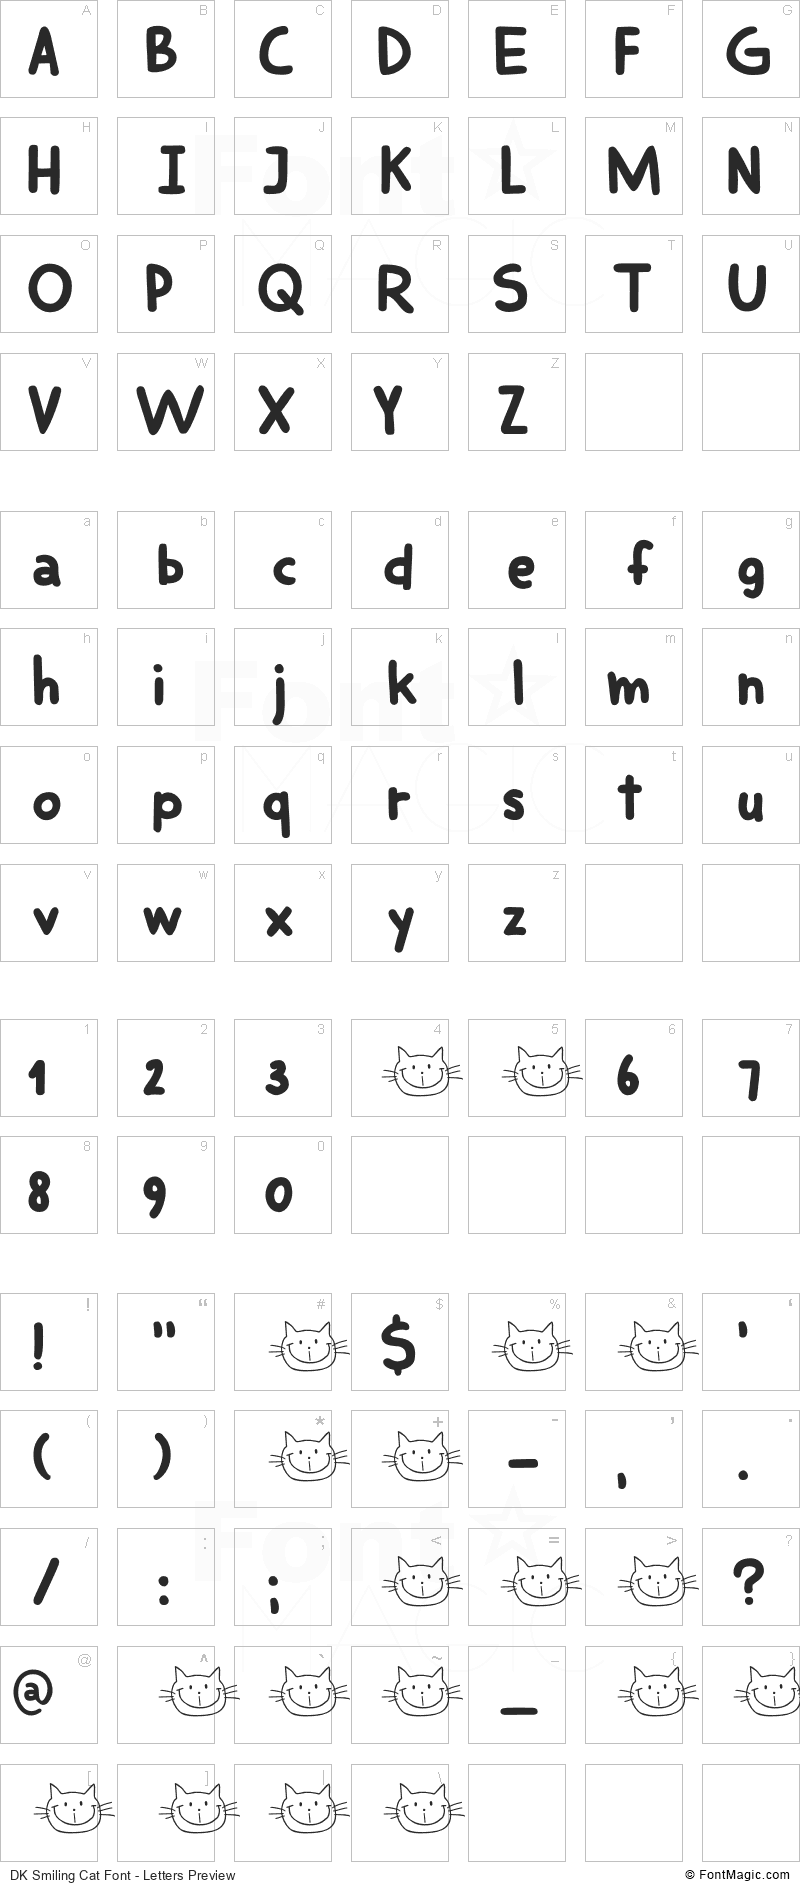 DK Smiling Cat Font - All Latters Preview Chart